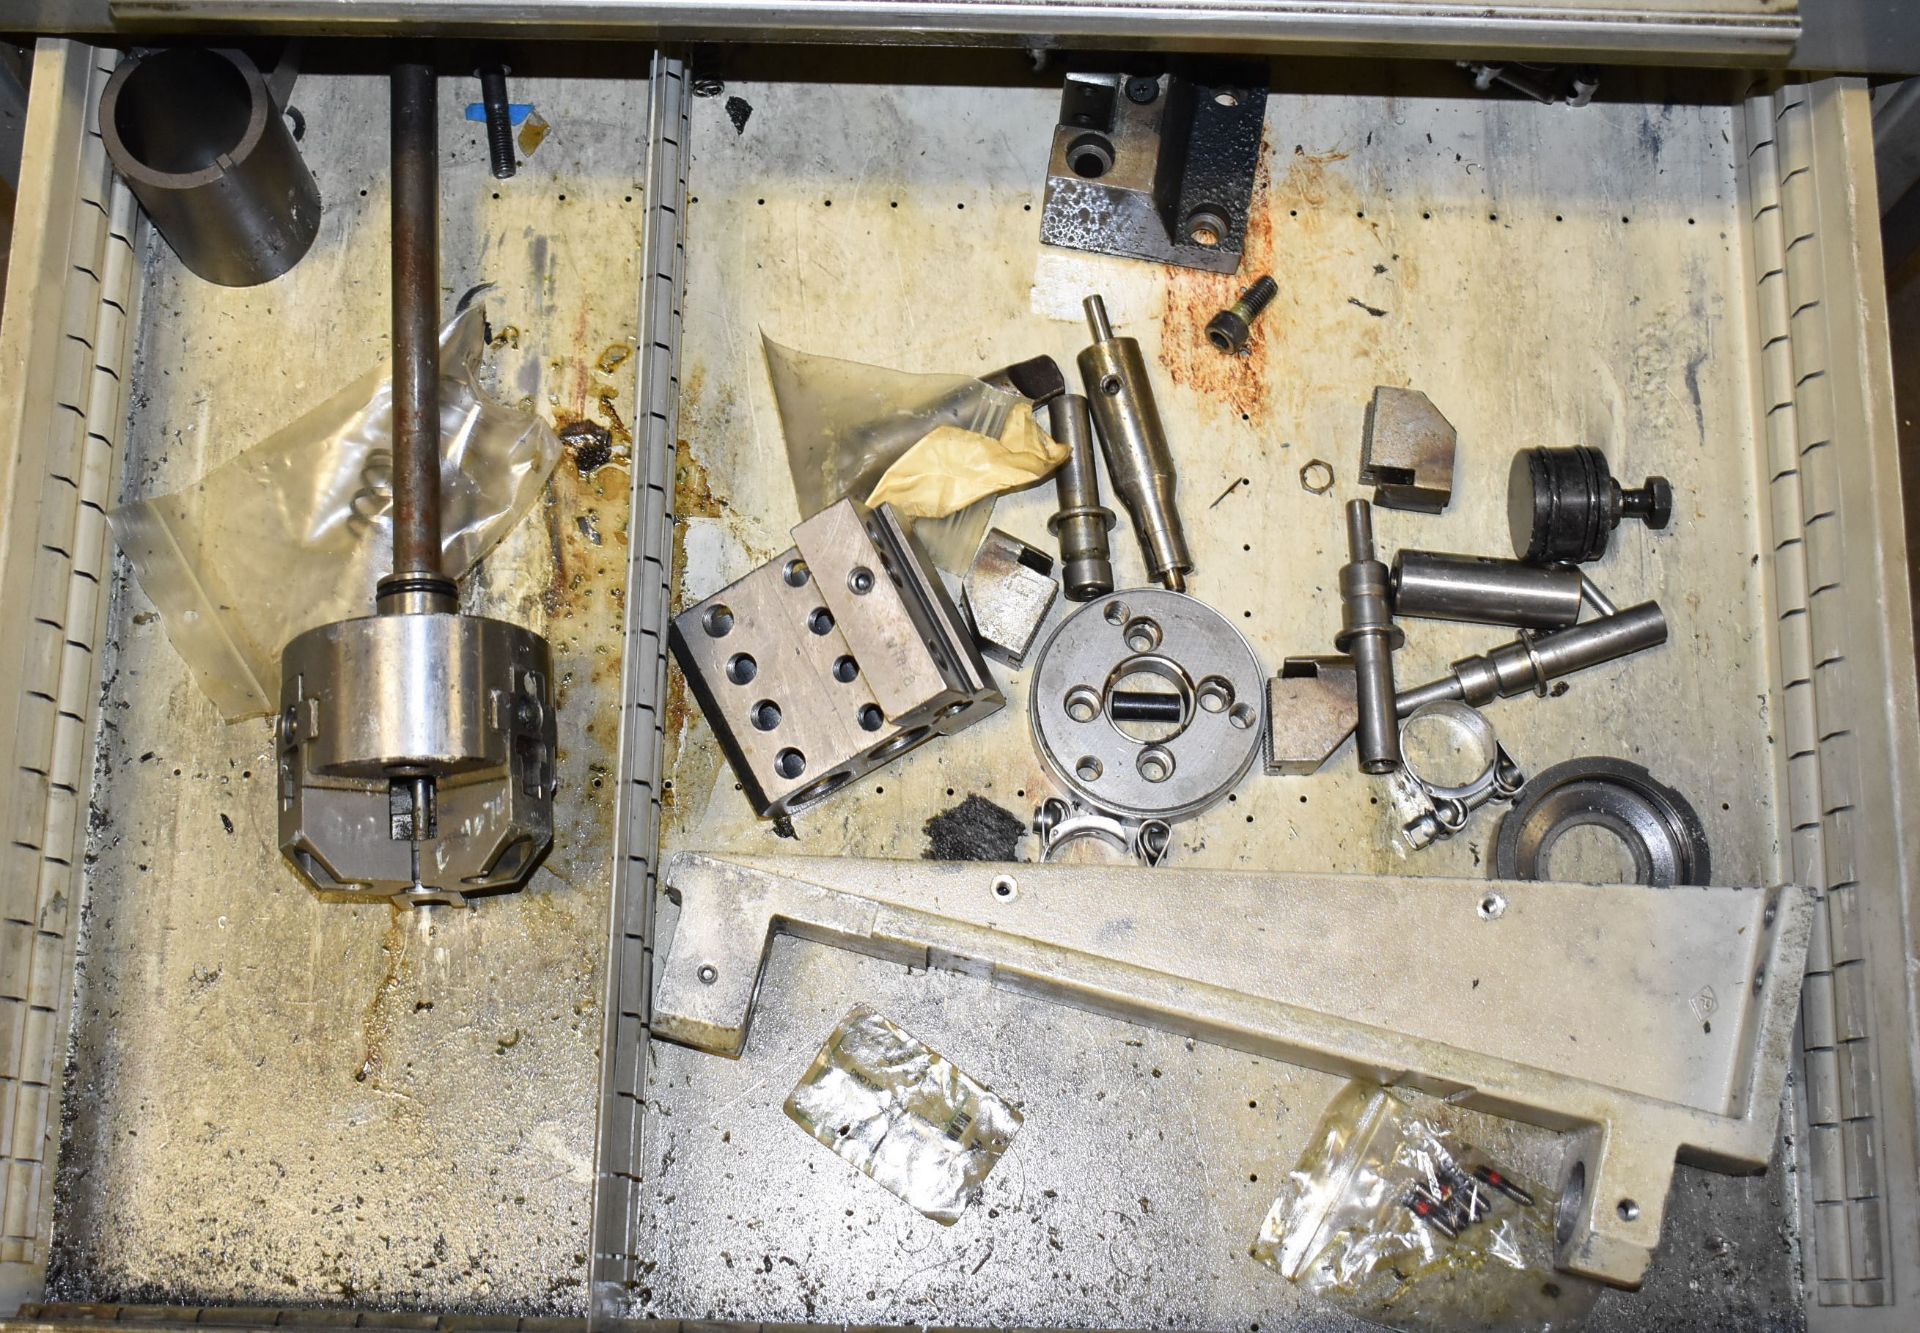 LOT/ CONTENTS OF CABINET CONSISTING OF TURNING CENTER ACCESSORIES - Image 6 of 7